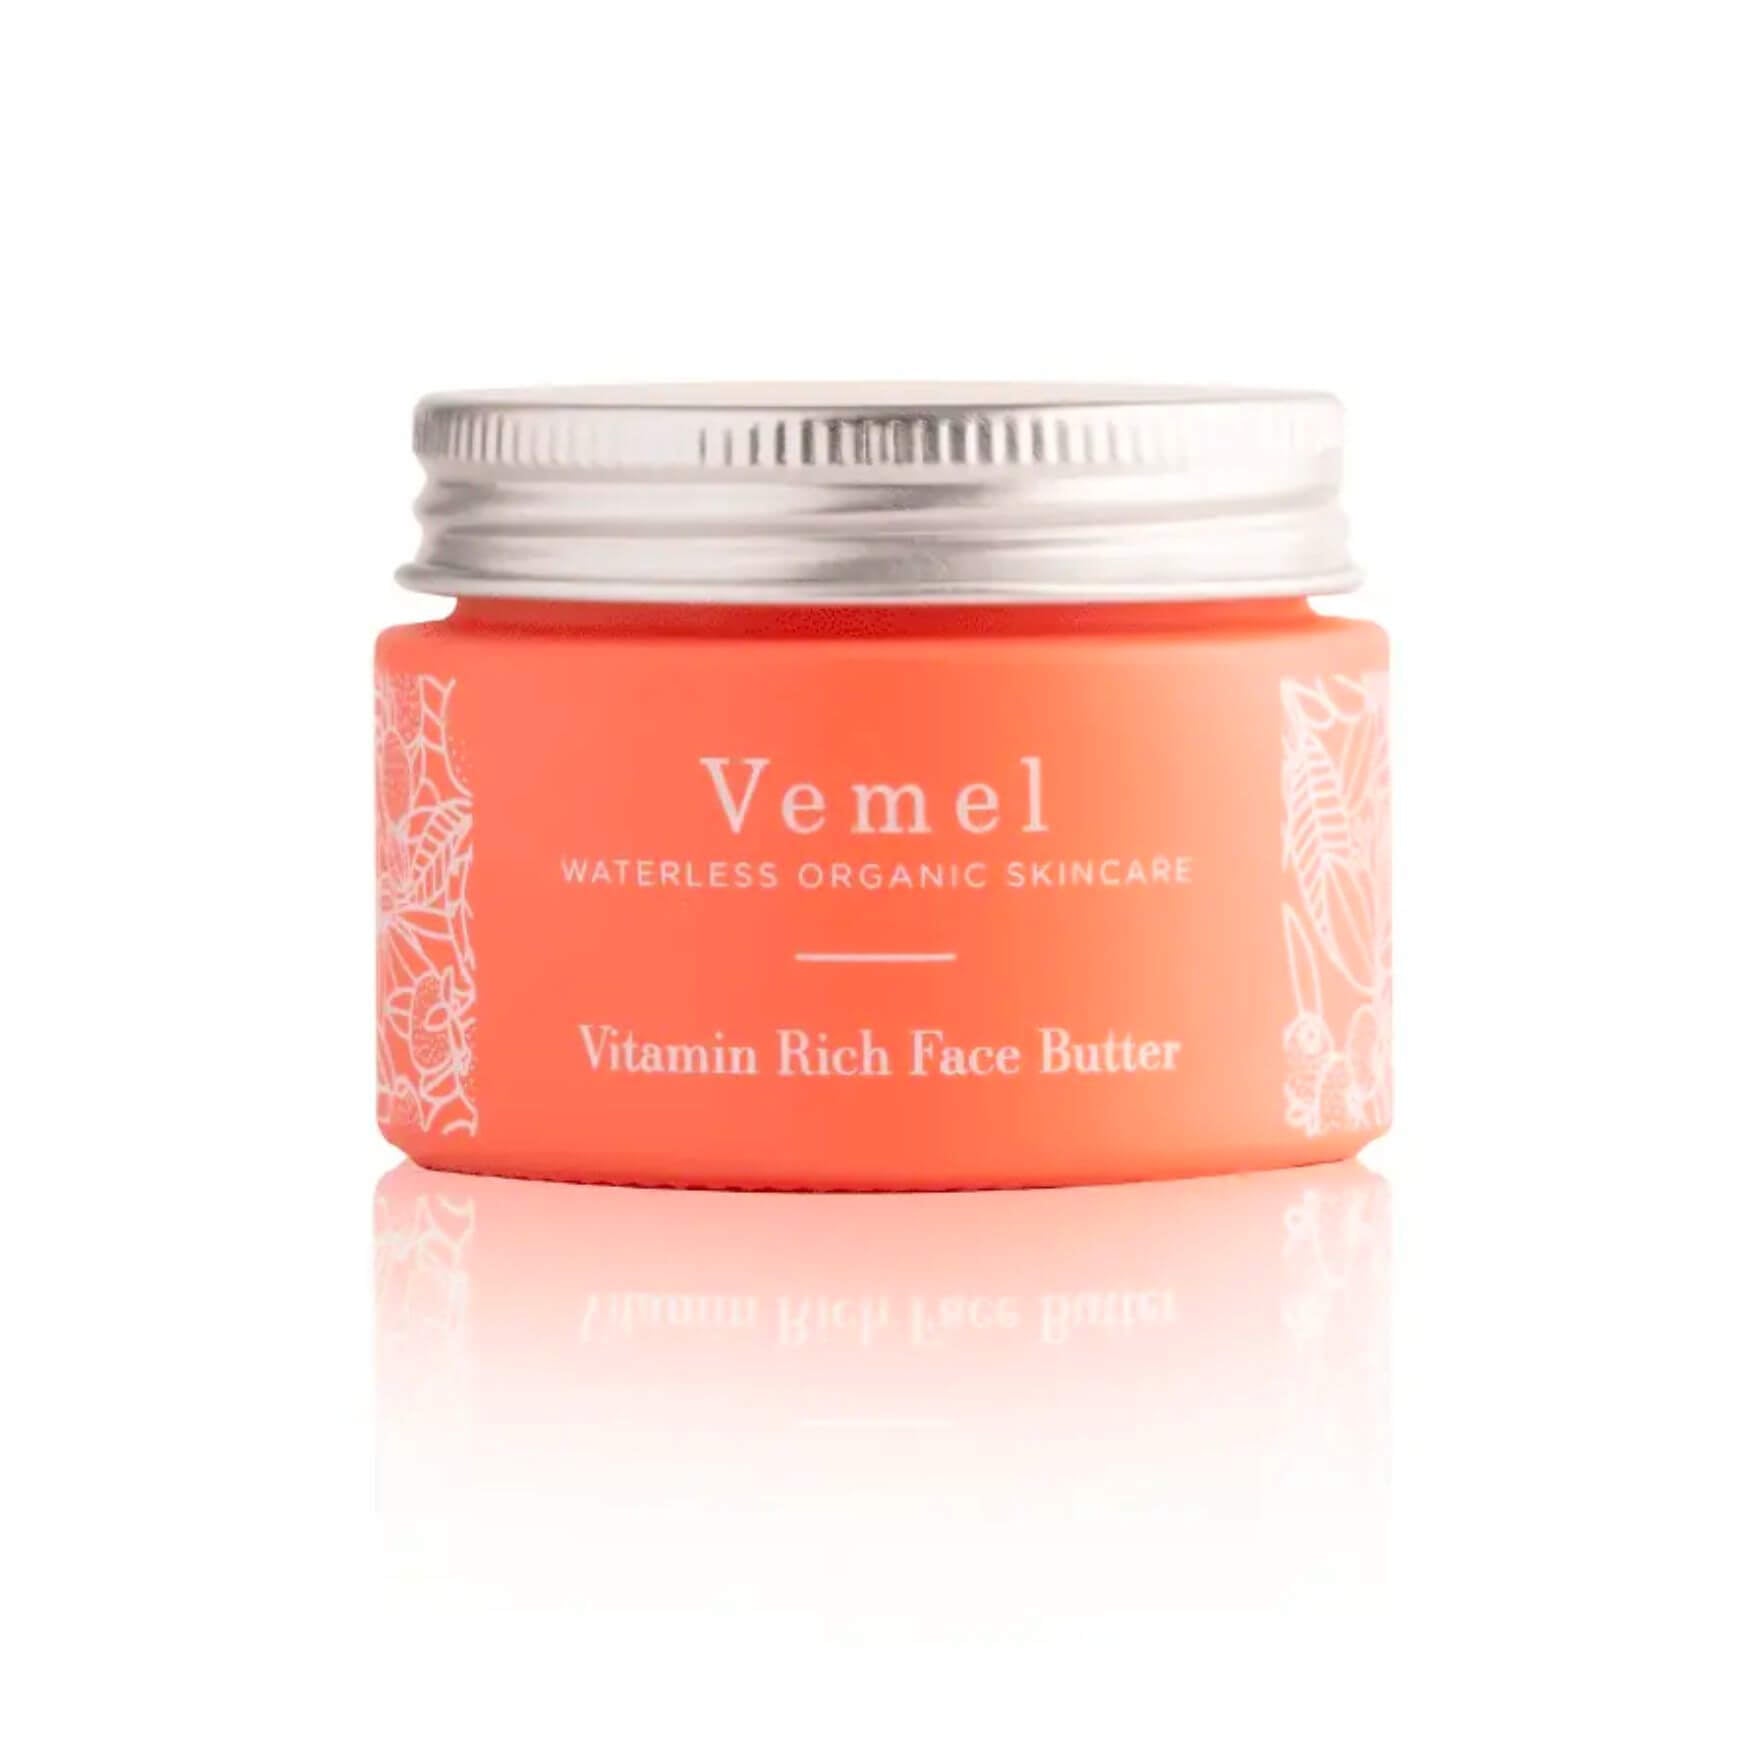 Vitamin Rich Face Butter - The Plastic Free Co.